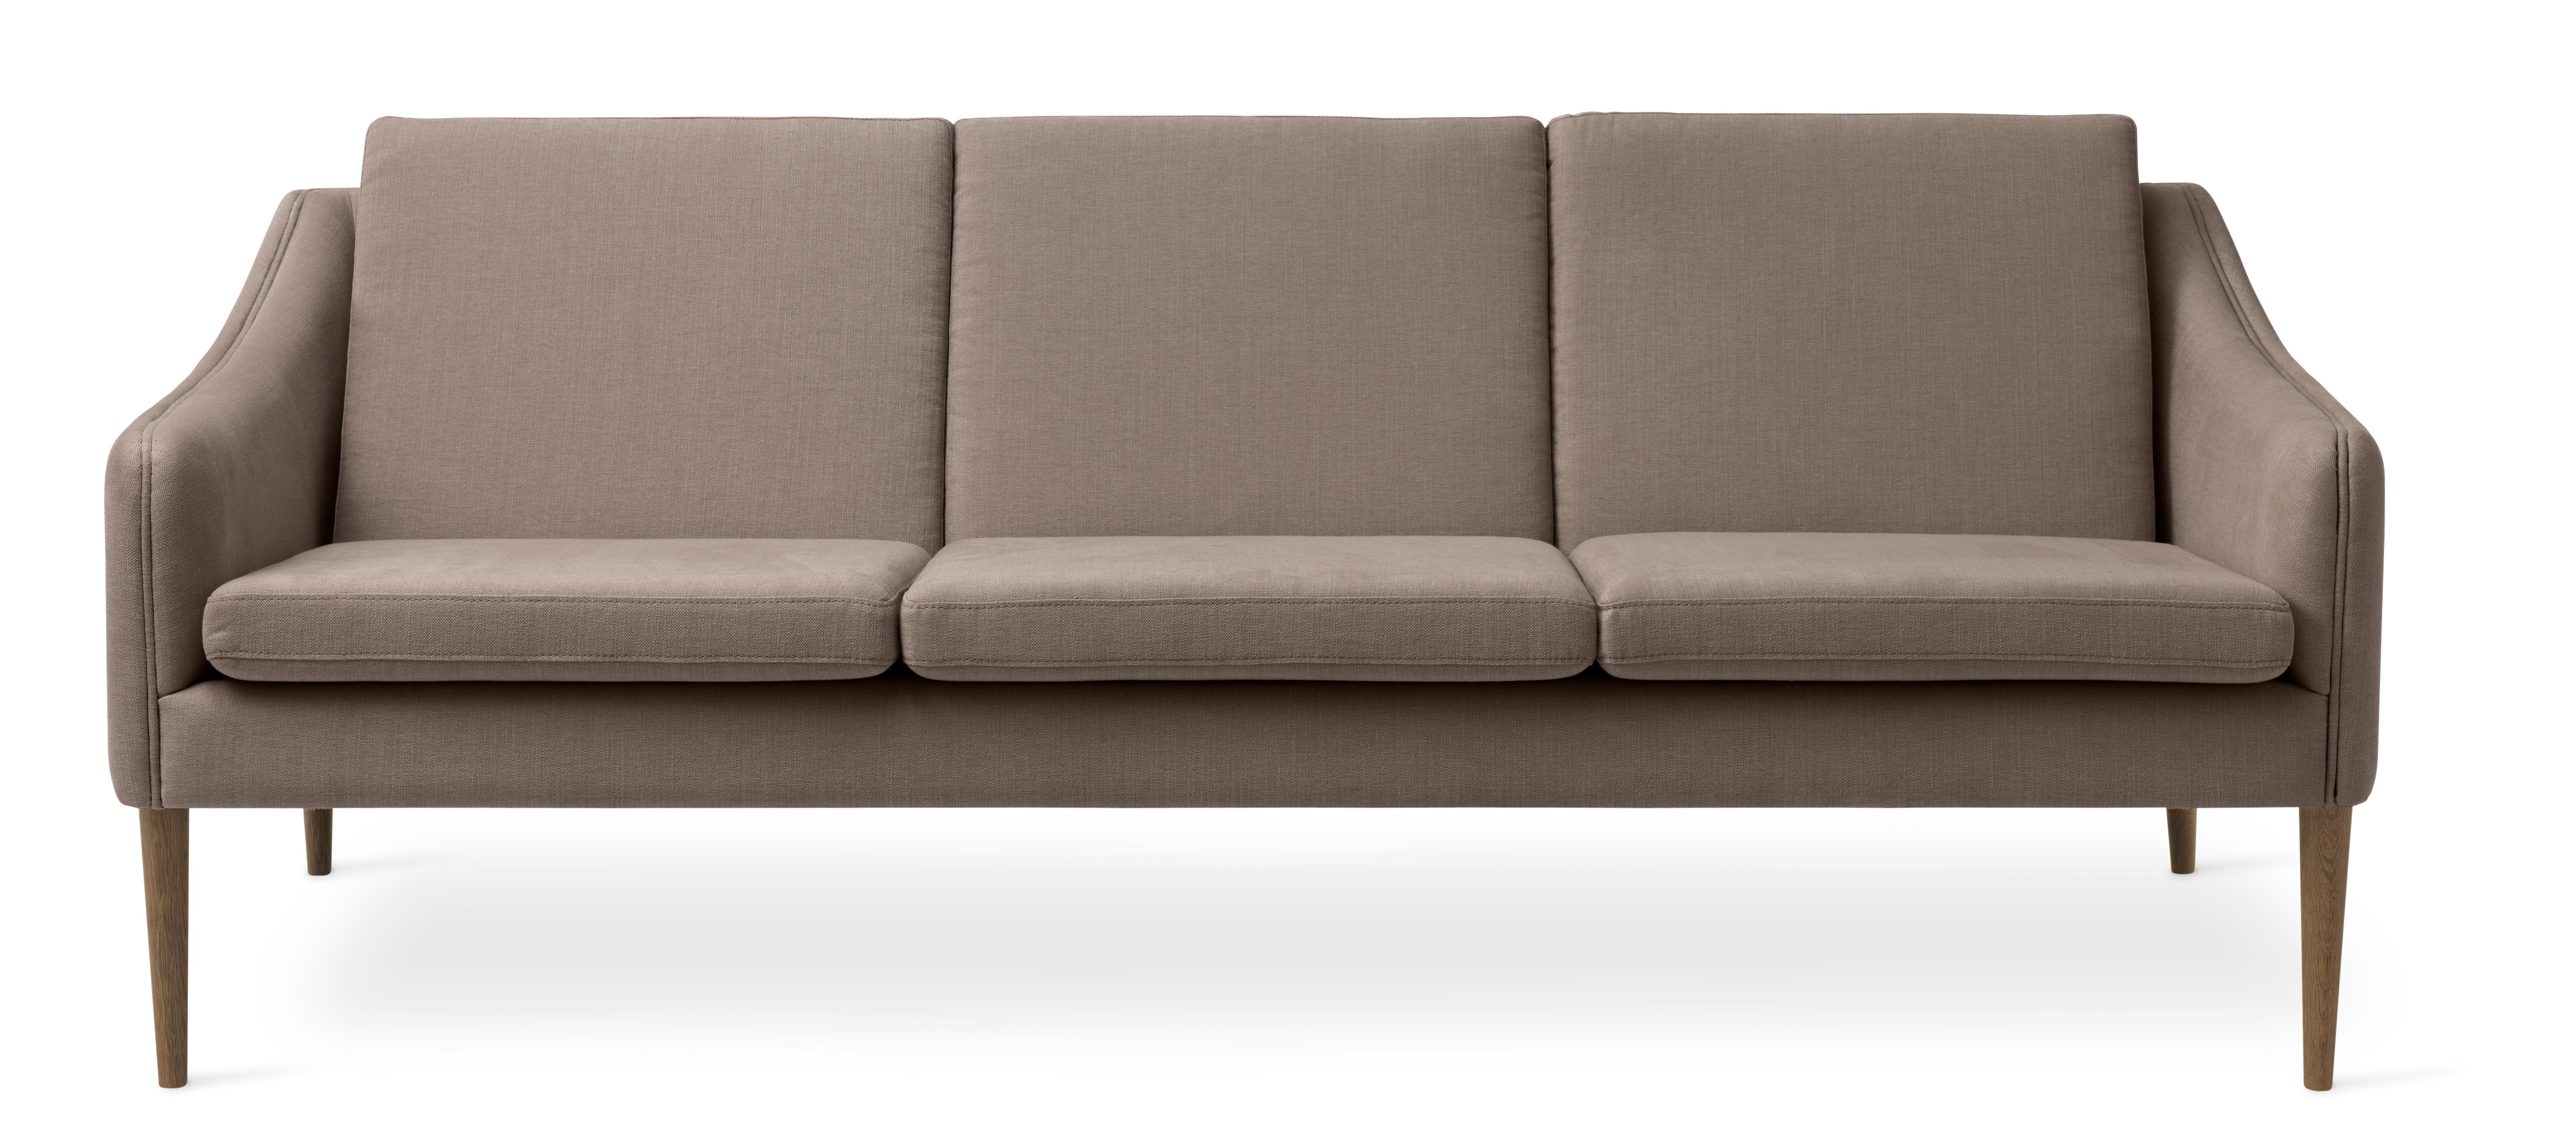 For Sale: Gray (Caleido 9998) Mr. Olsen 3-Seat Sofa with Smoked Oak Legs, by Hans Olsen from Warm Nordic